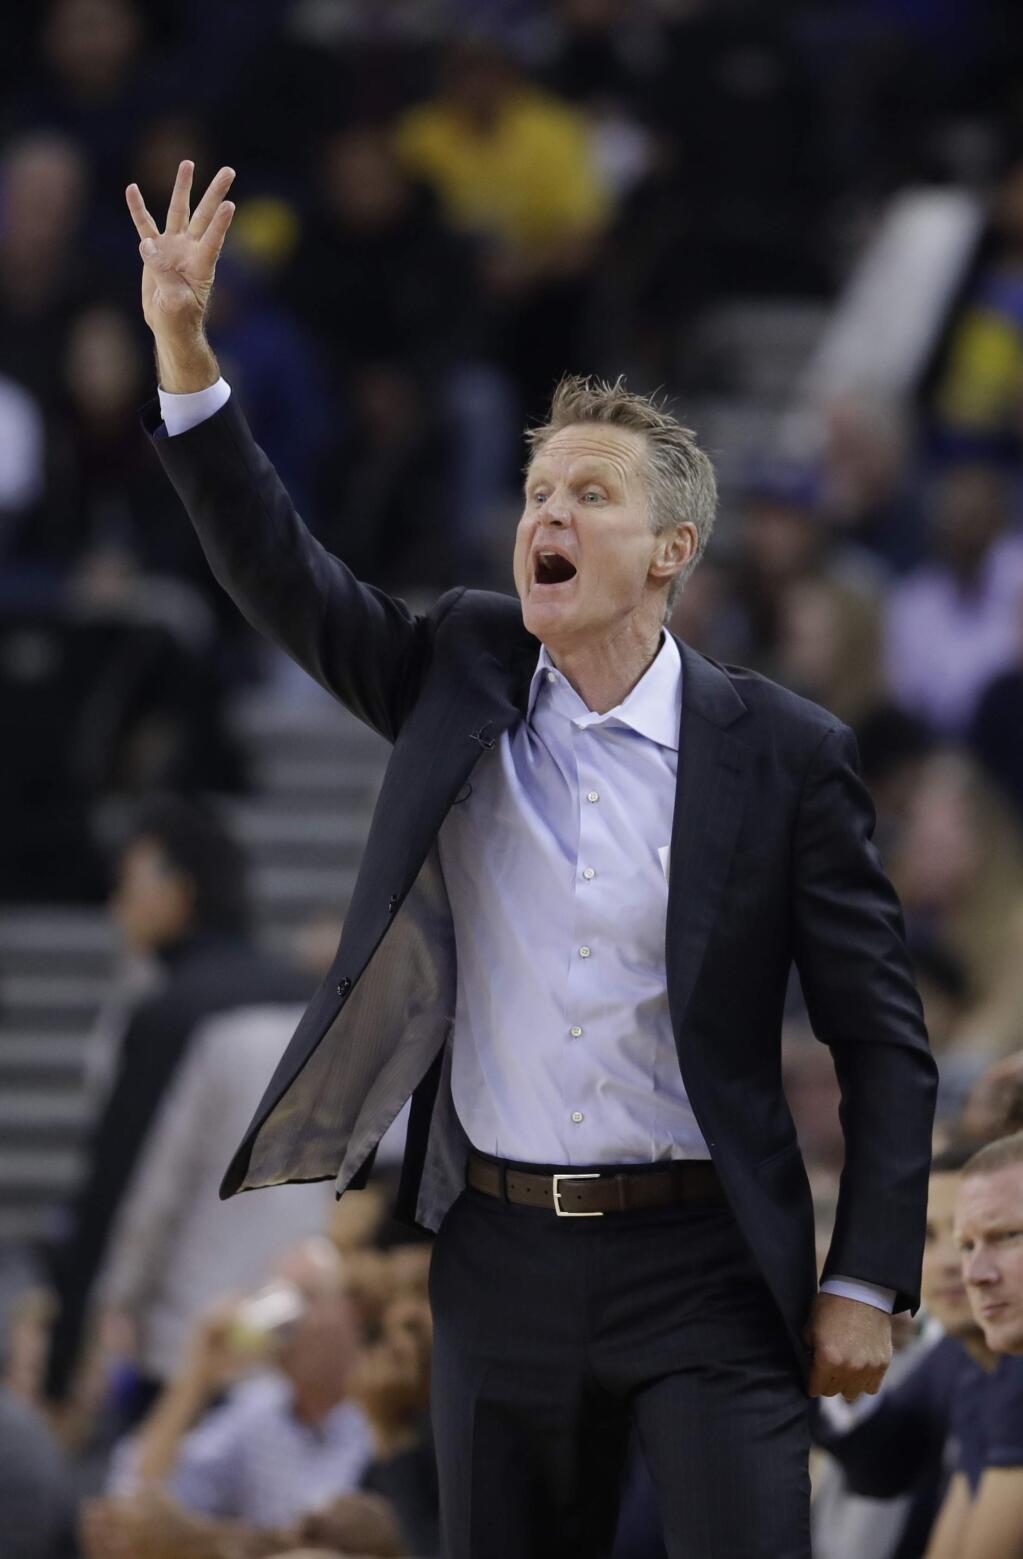 Golden State Warriors coach Steve Kerr yells from the bench during the first half against the Los Angeles Clippers on Thursday, Feb. 22, 2018, in Oakland. (AP Photo/Marcio Jose Sanchez)